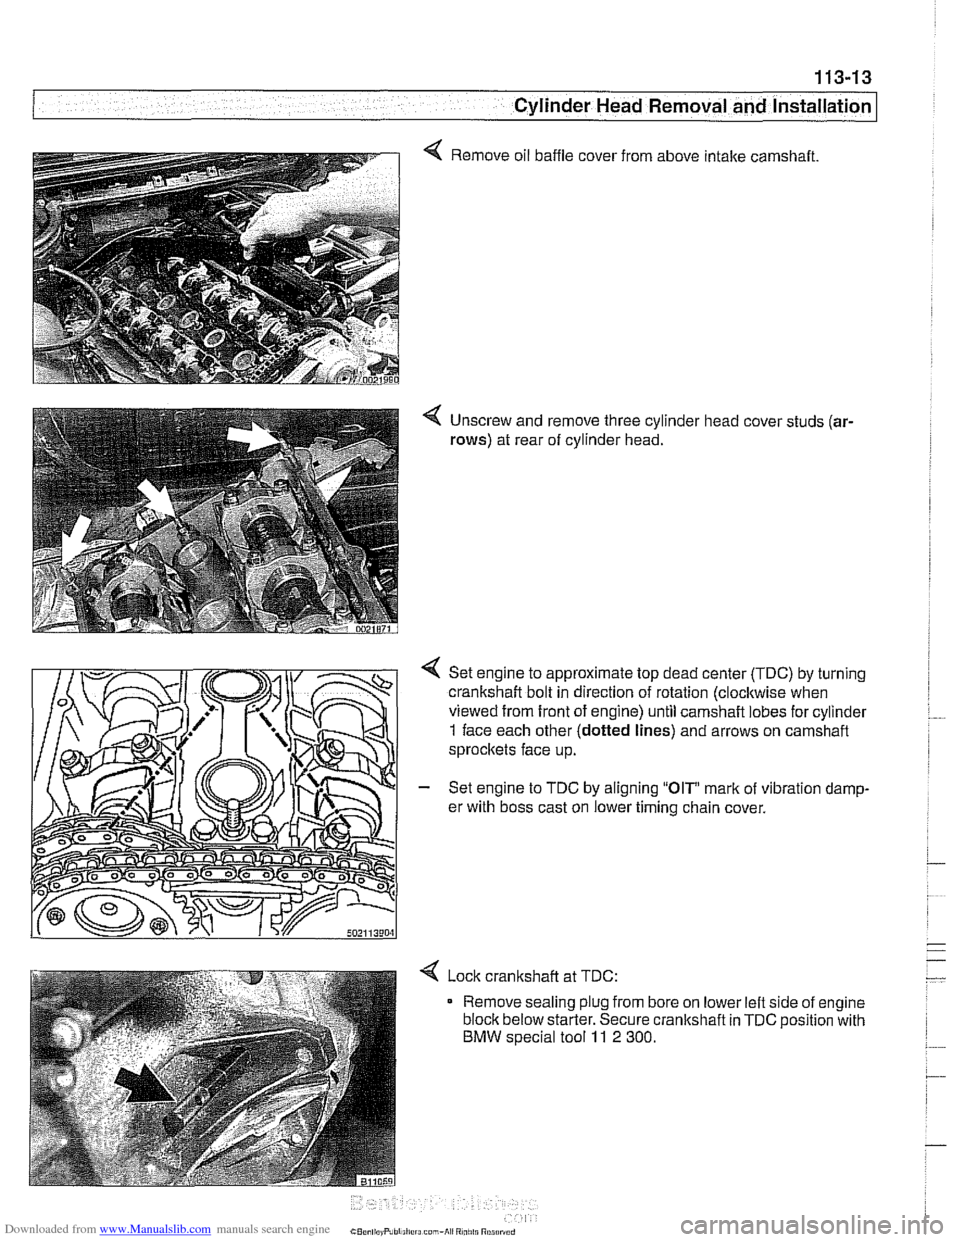 BMW 528i 2000 E39 Owners Guide Downloaded from www.Manualslib.com manuals search engine 
- - , -. I Cylinder Head Removal and lnstallatio~ 
4 Remove oil baffle  cover from  above intake camshaft. 
4 Unscrew  and remove  three cylin